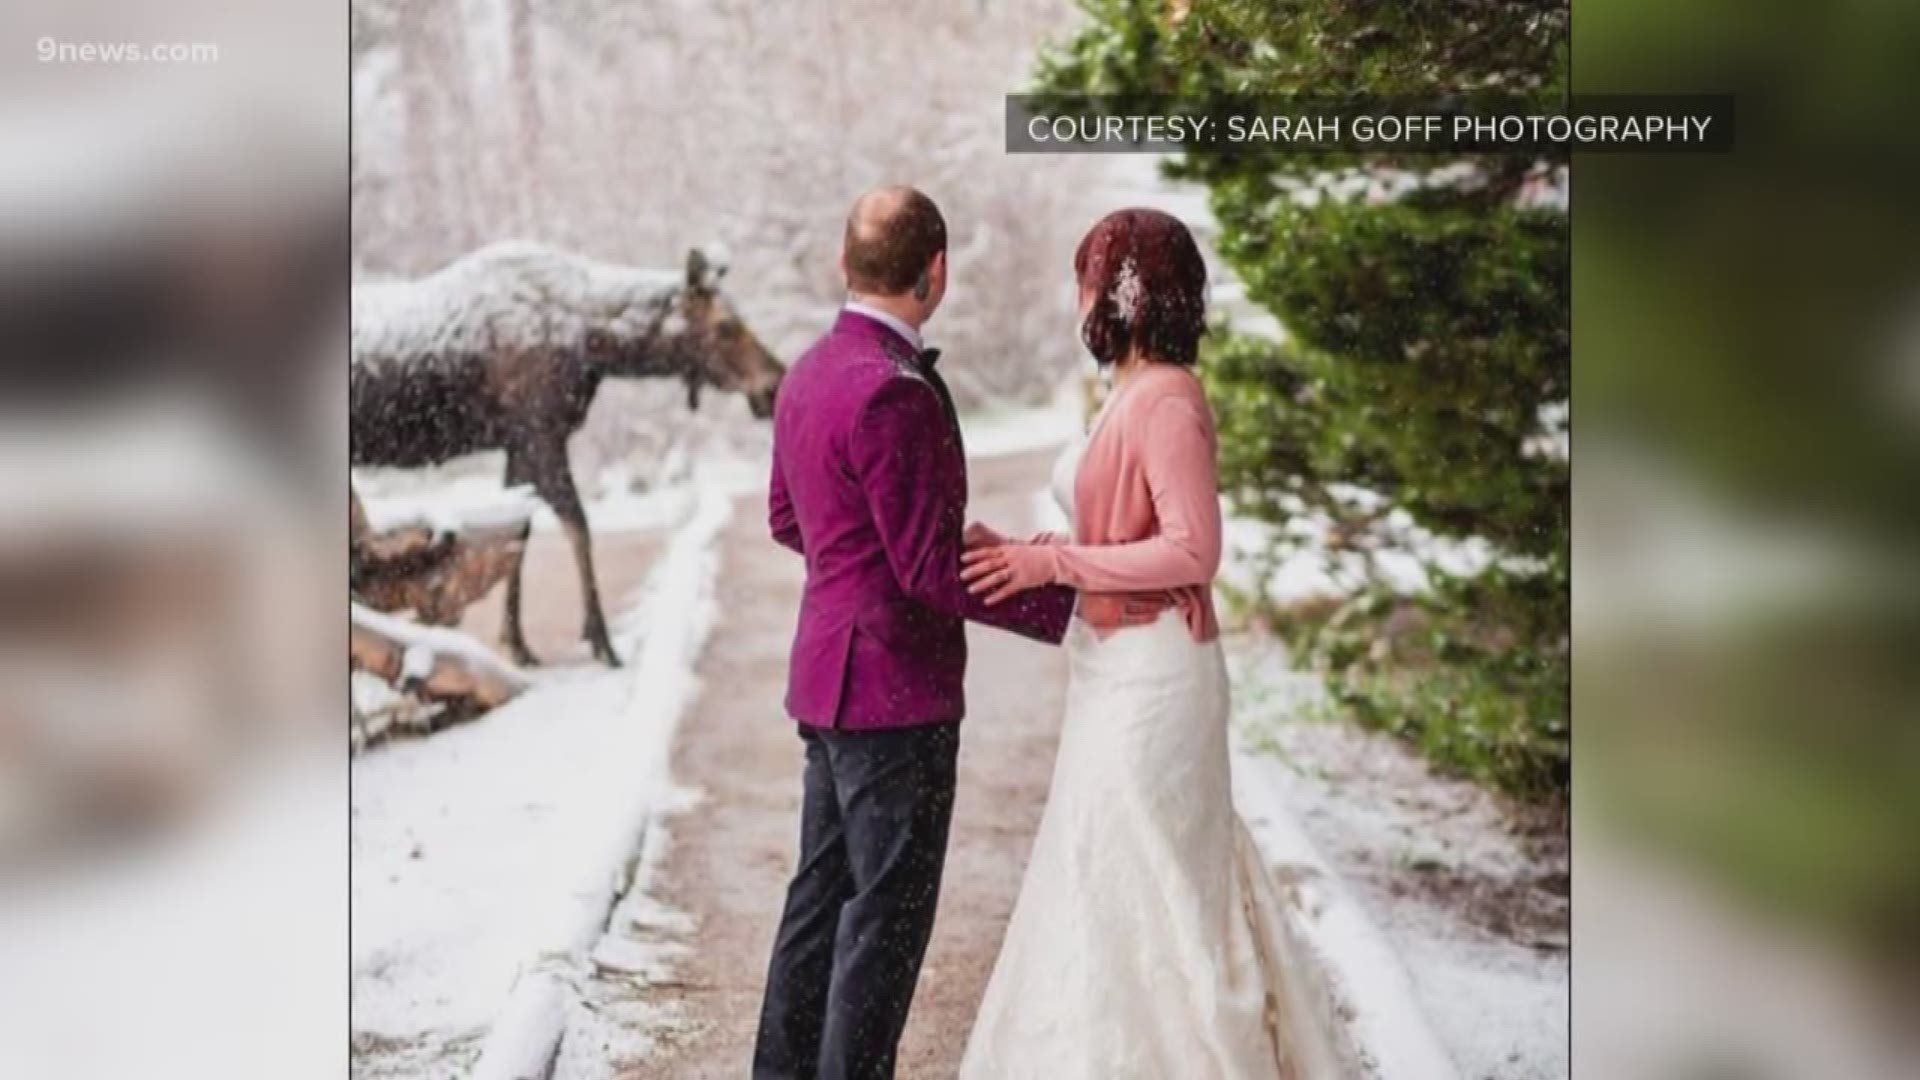 The couple from Illinois, who had come to Colorado to elope, had never seen a moose before.